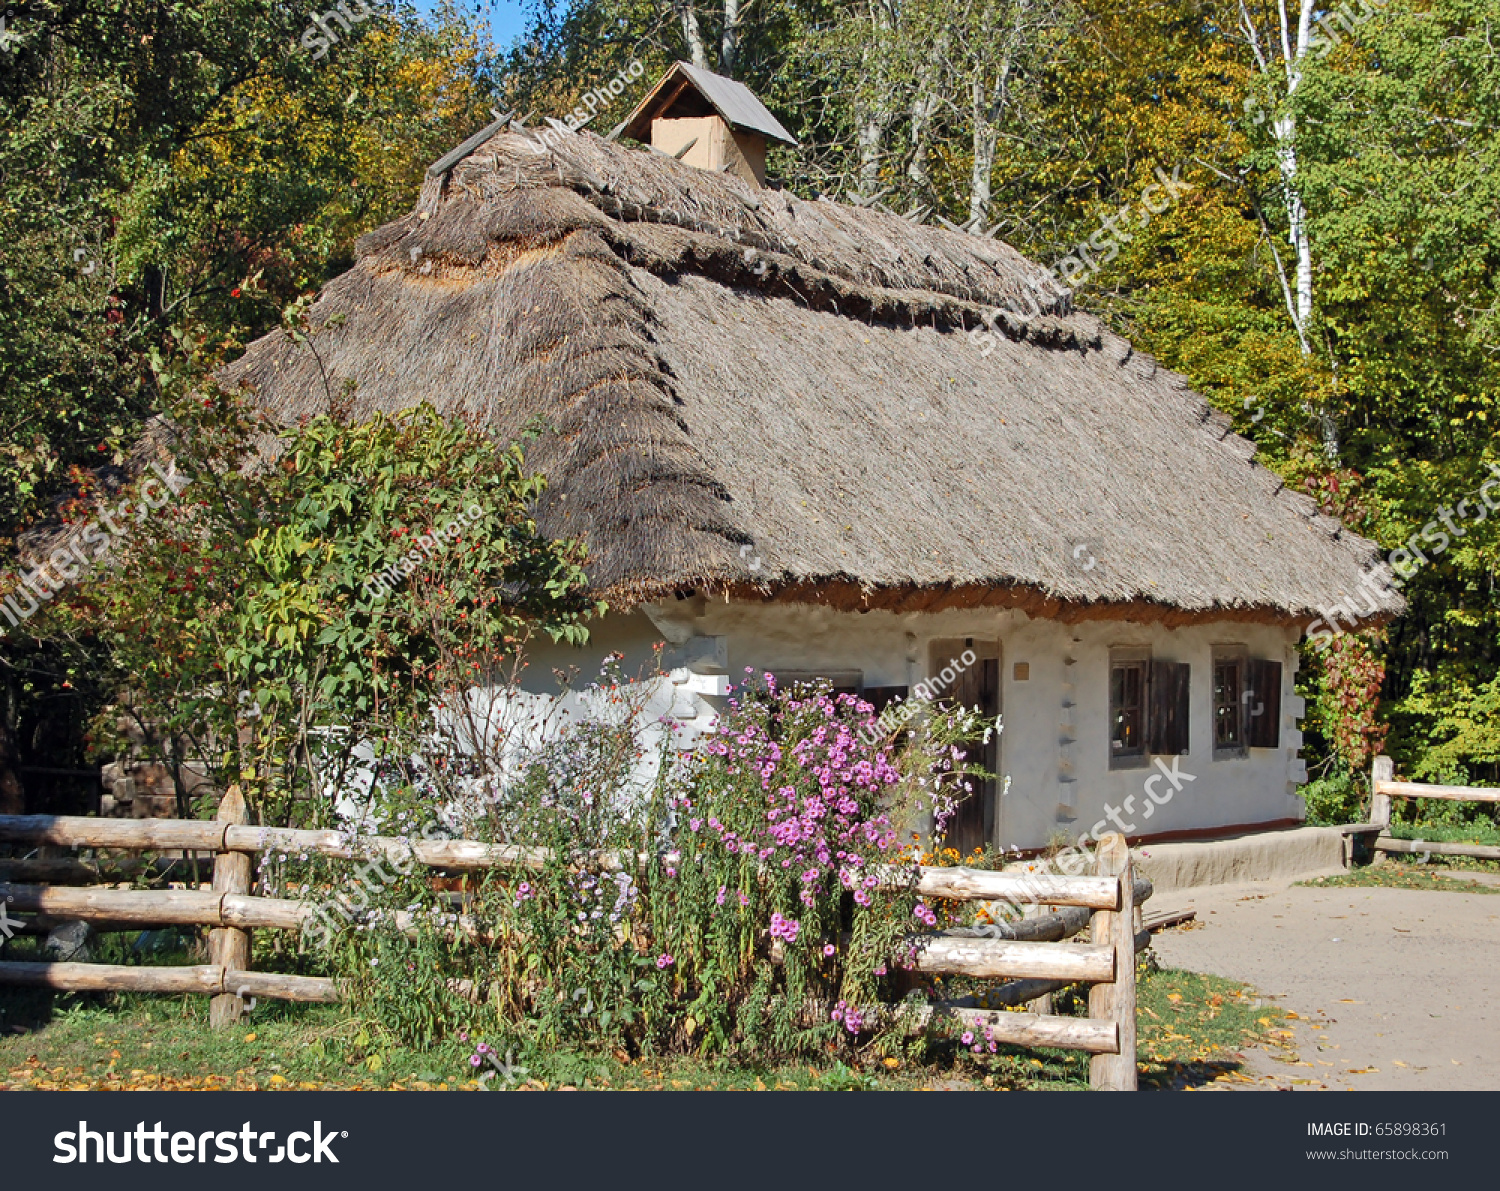 73,990 Russian Countryside Stock Photos, Images & Photography ...